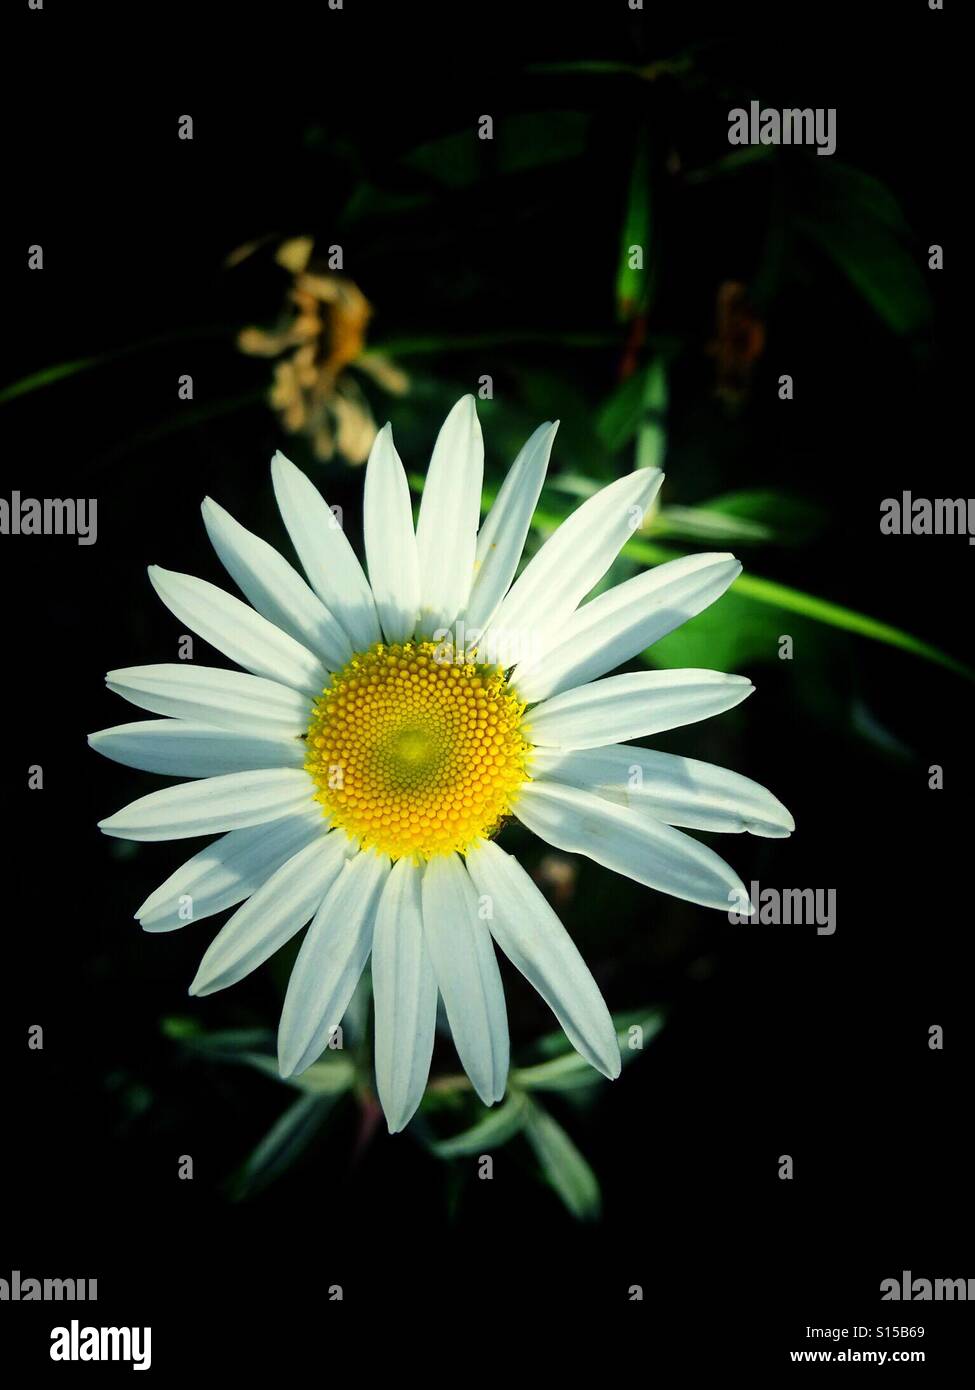 Daisy, pure and simple. A single flowerhead with white petals and a yellow centre. Stock Photo